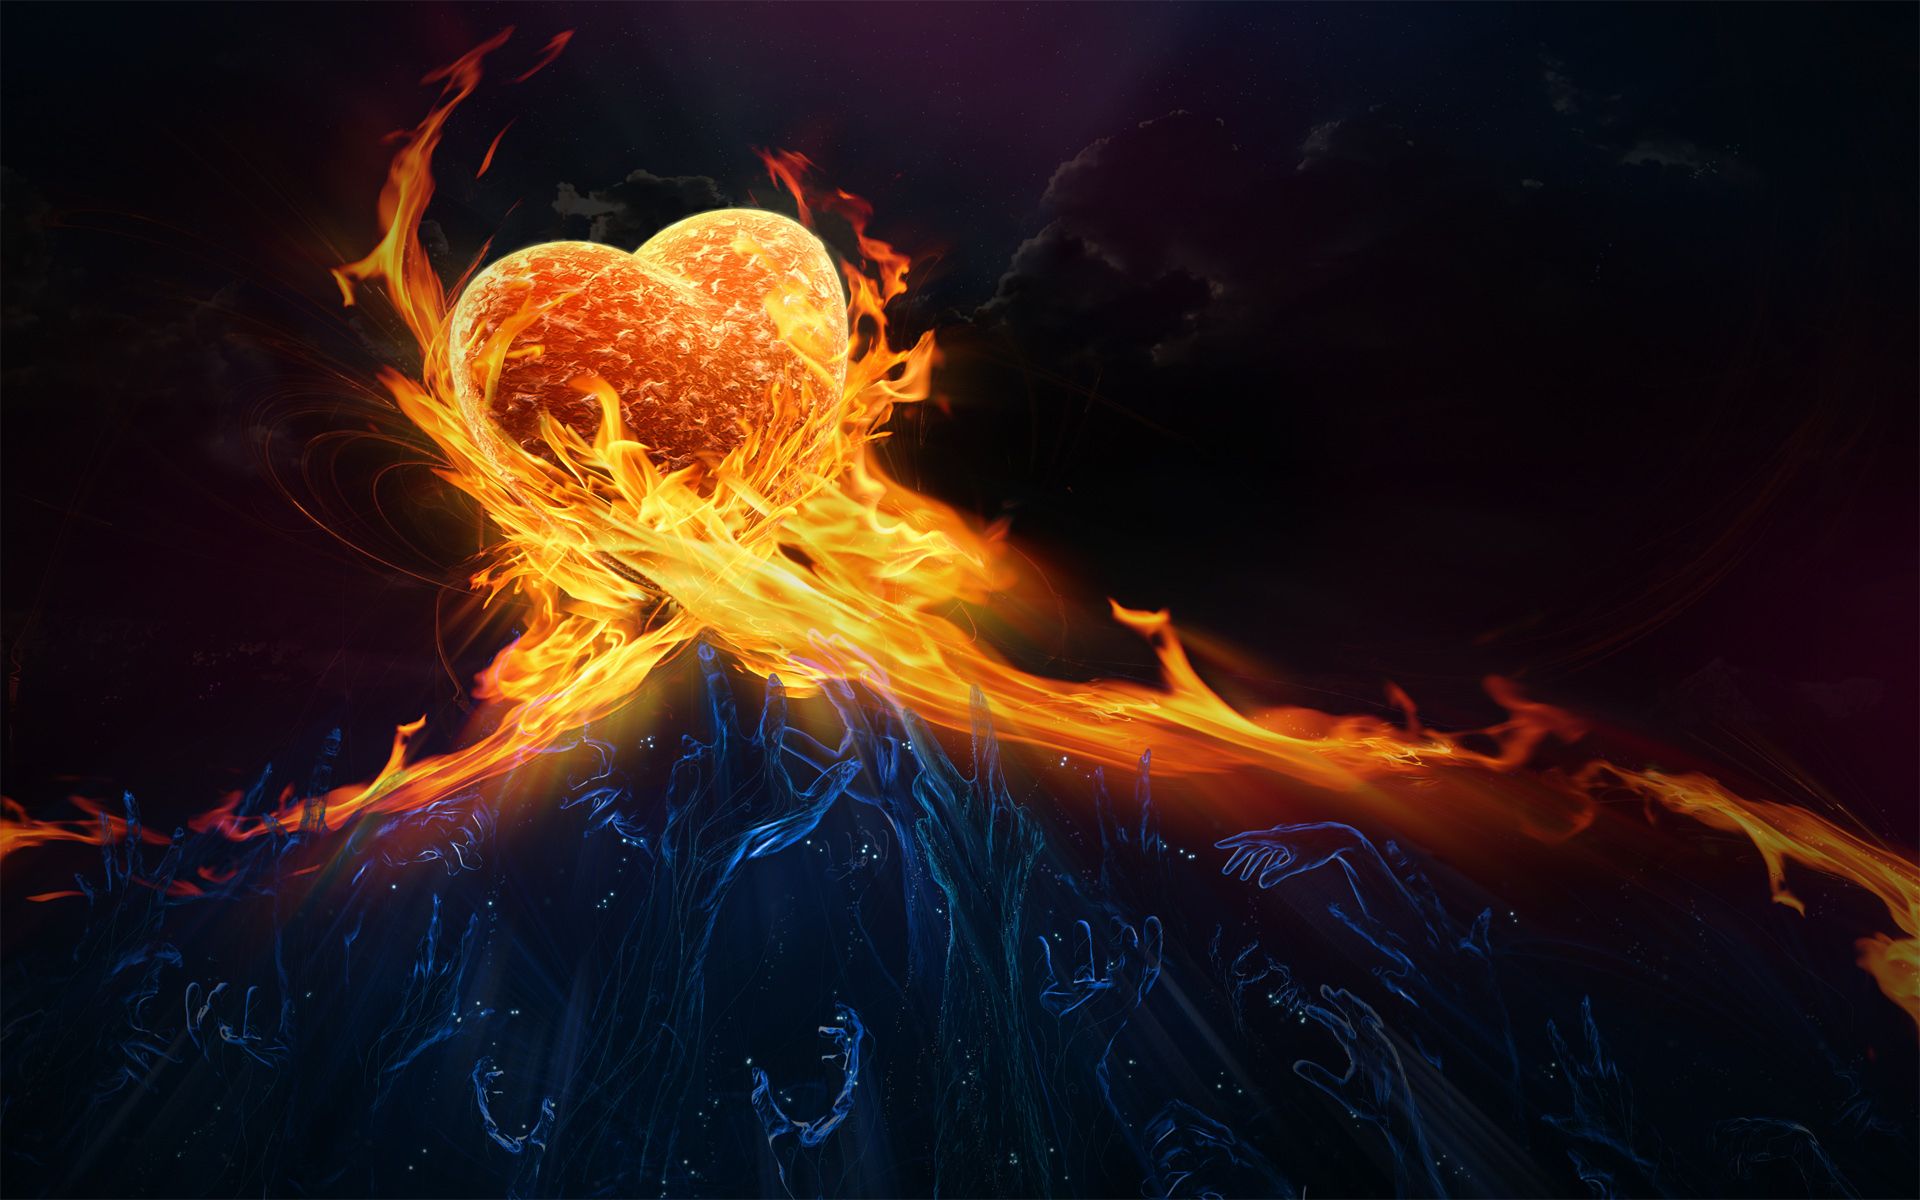 love, Romance, Hate, Fire, Flames, Ice, Mood, Emotion, Cold, Hot